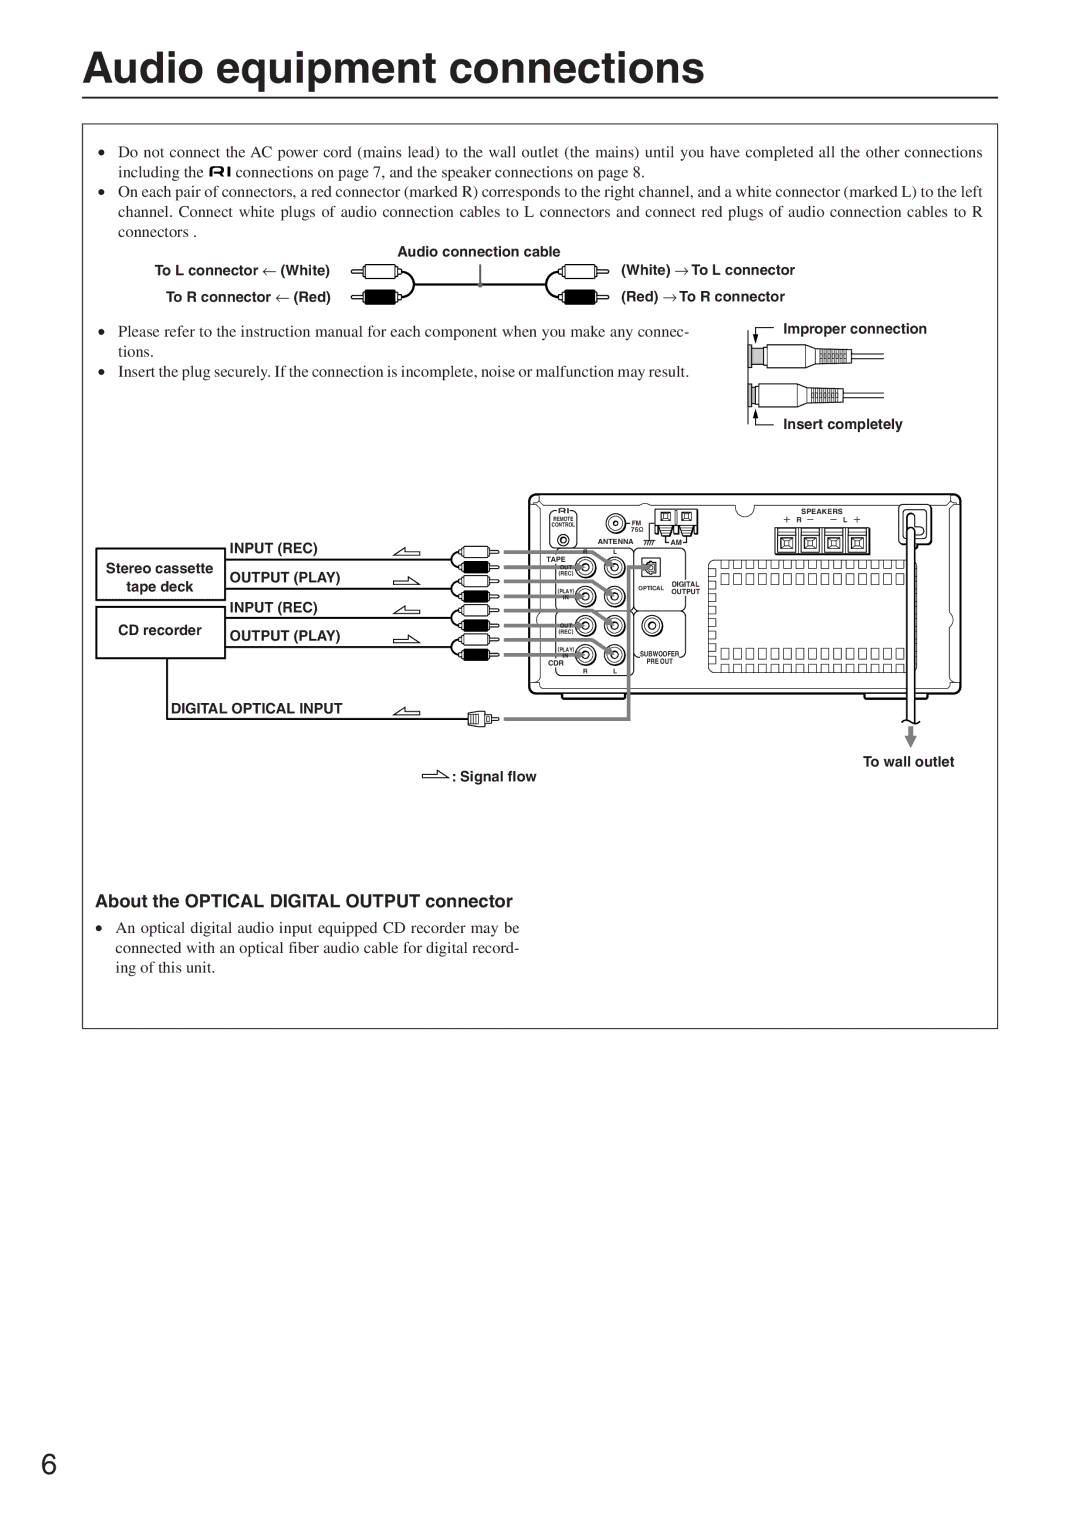 Onkyo CR-305FX instruction manual Audio equipment connections, About the Optical Digital Output connector 